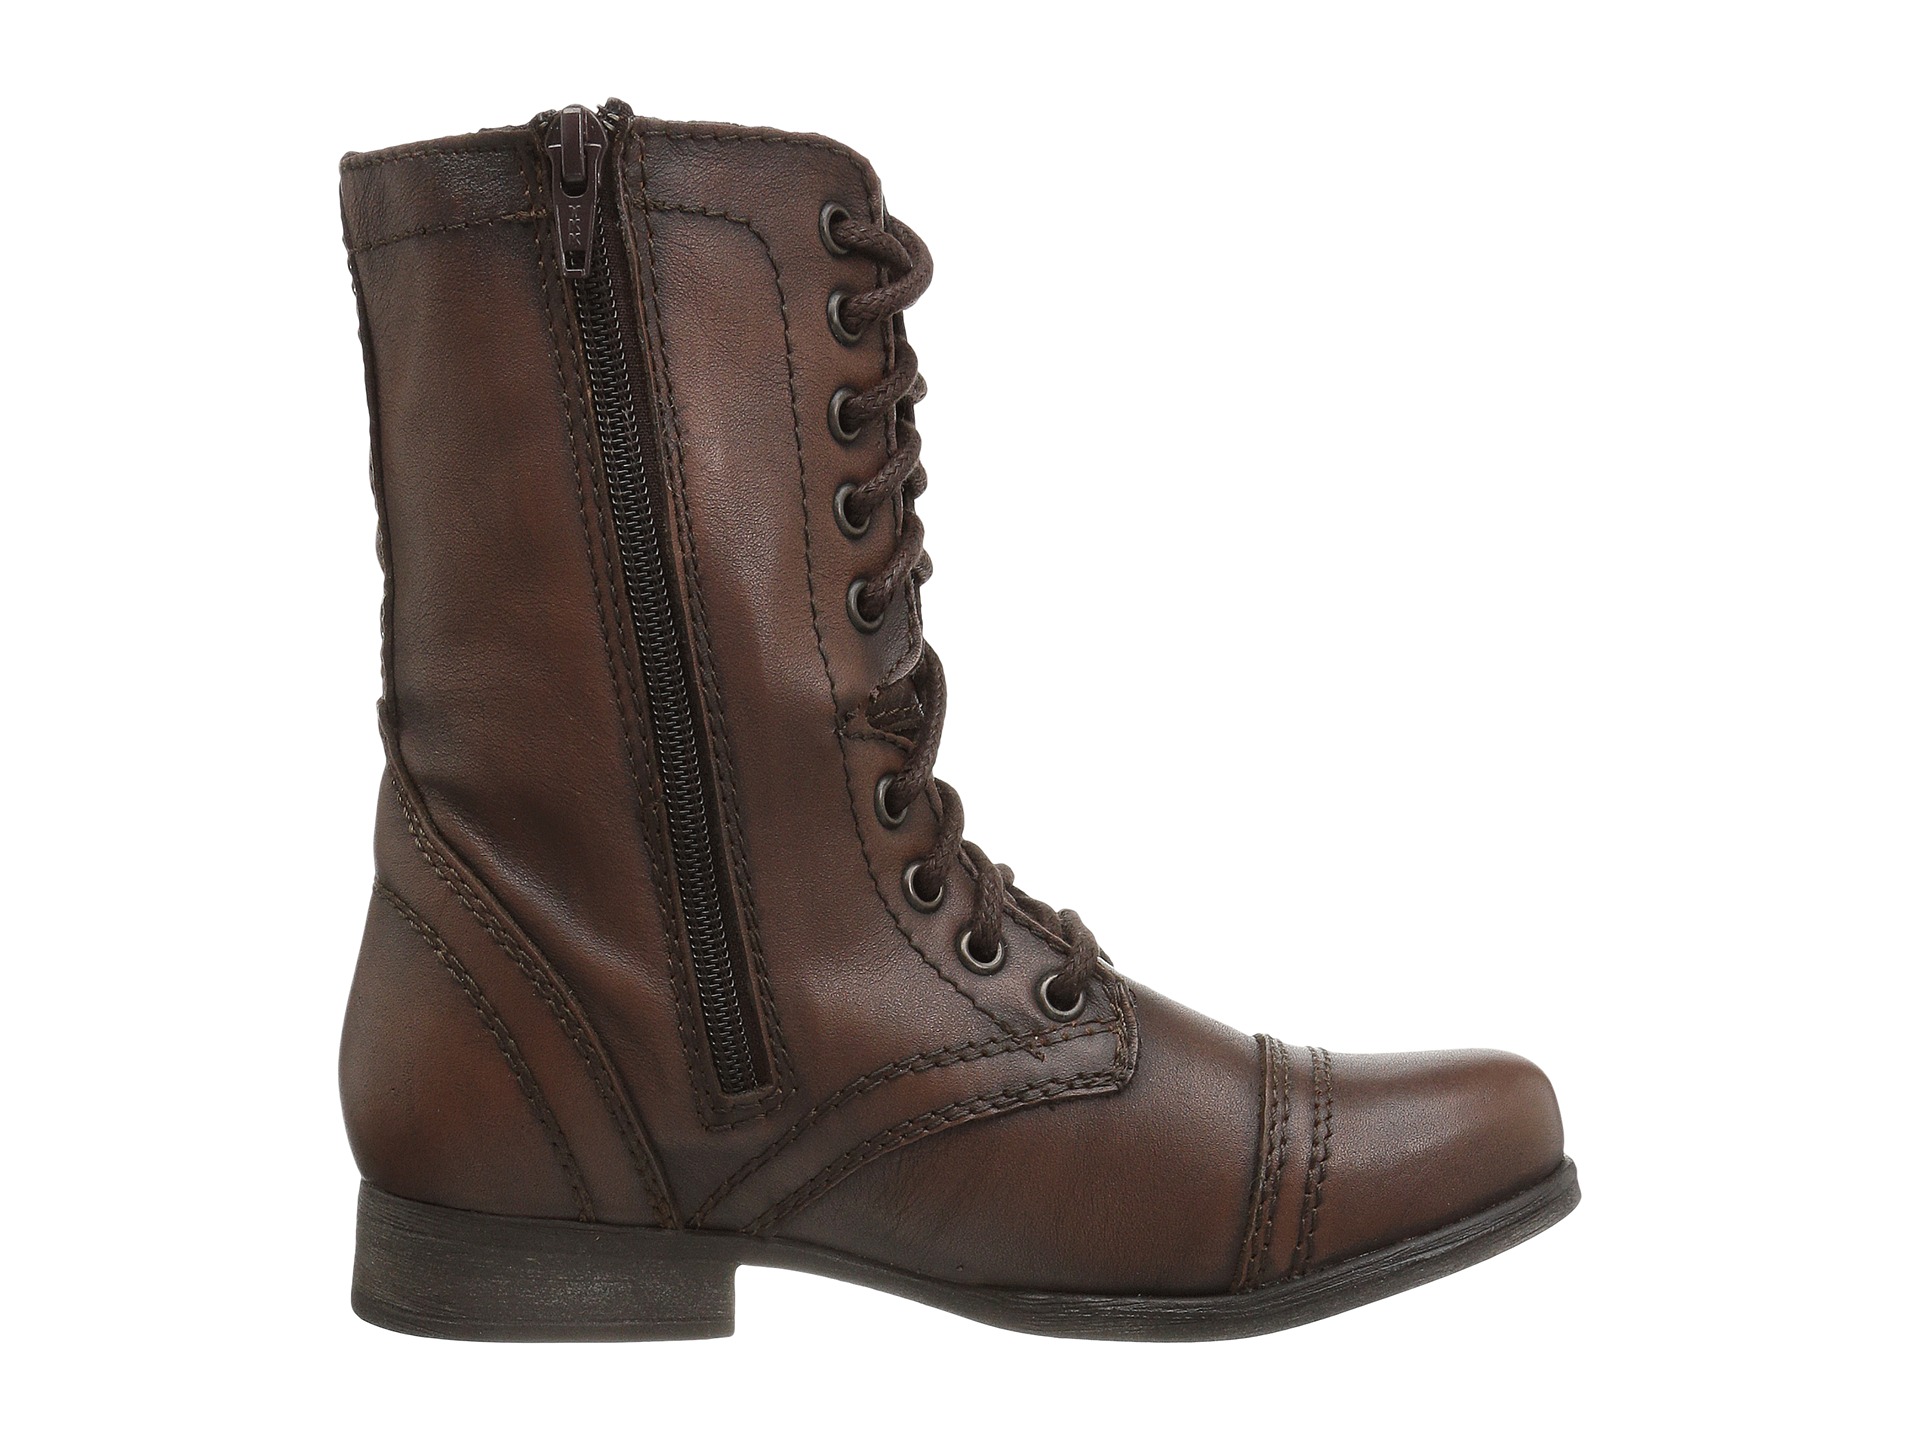 Steve Madden Troopa Cognac Leather - Zappos.com Free Shipping BOTH Ways